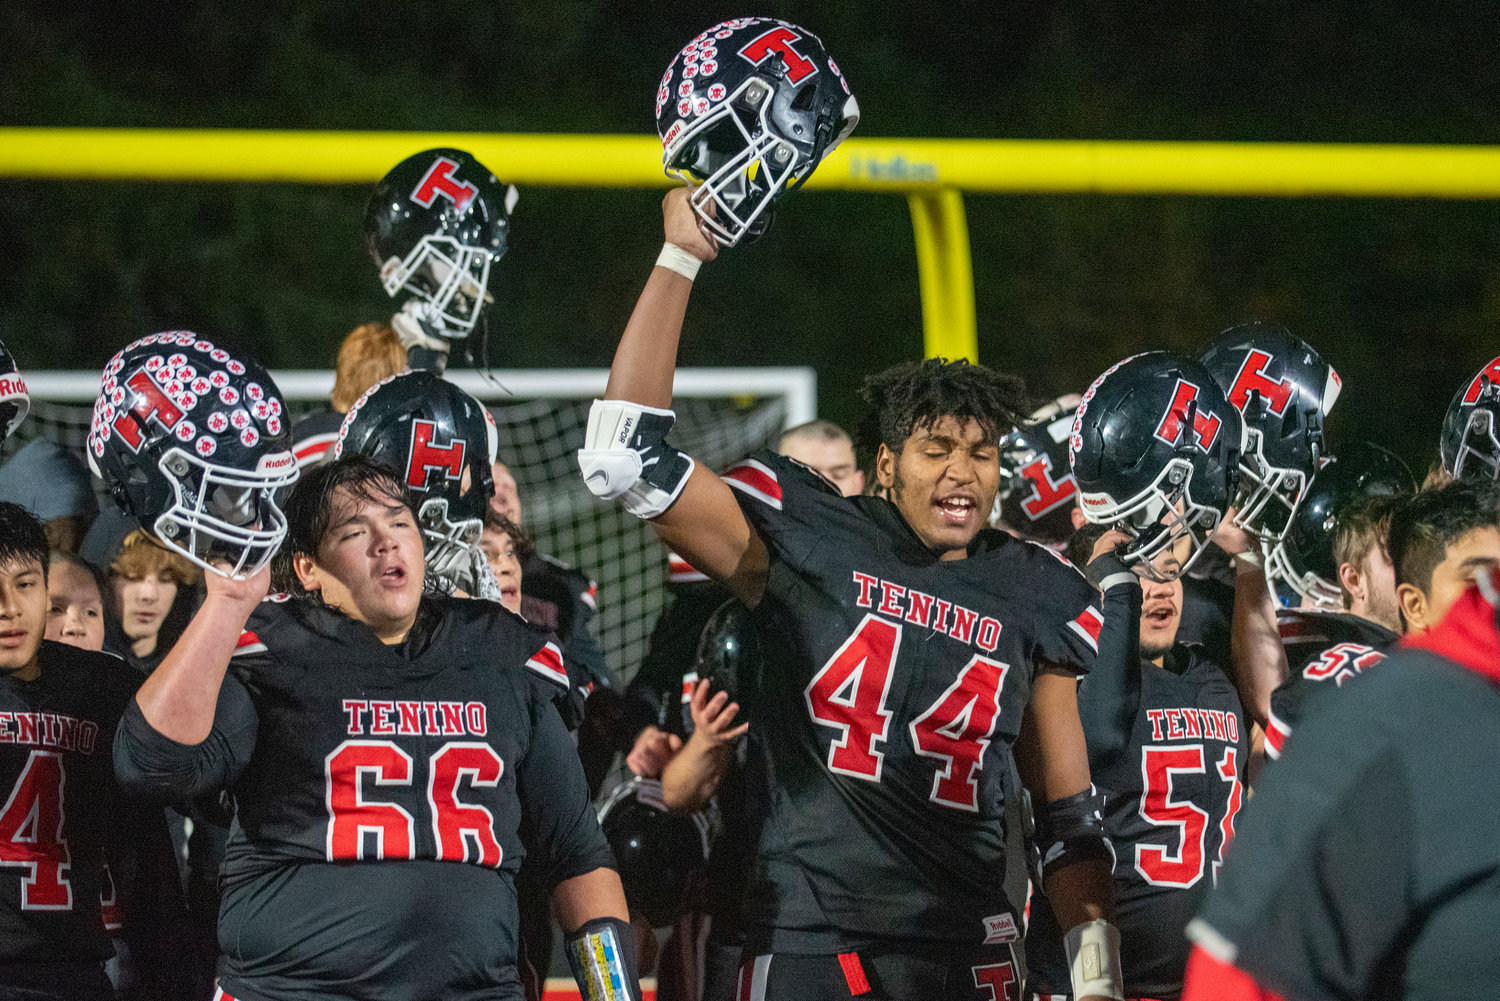 Members of the Tenino football team celebrate after defeating Castle Rock 56-0 in the district playoffs in November.